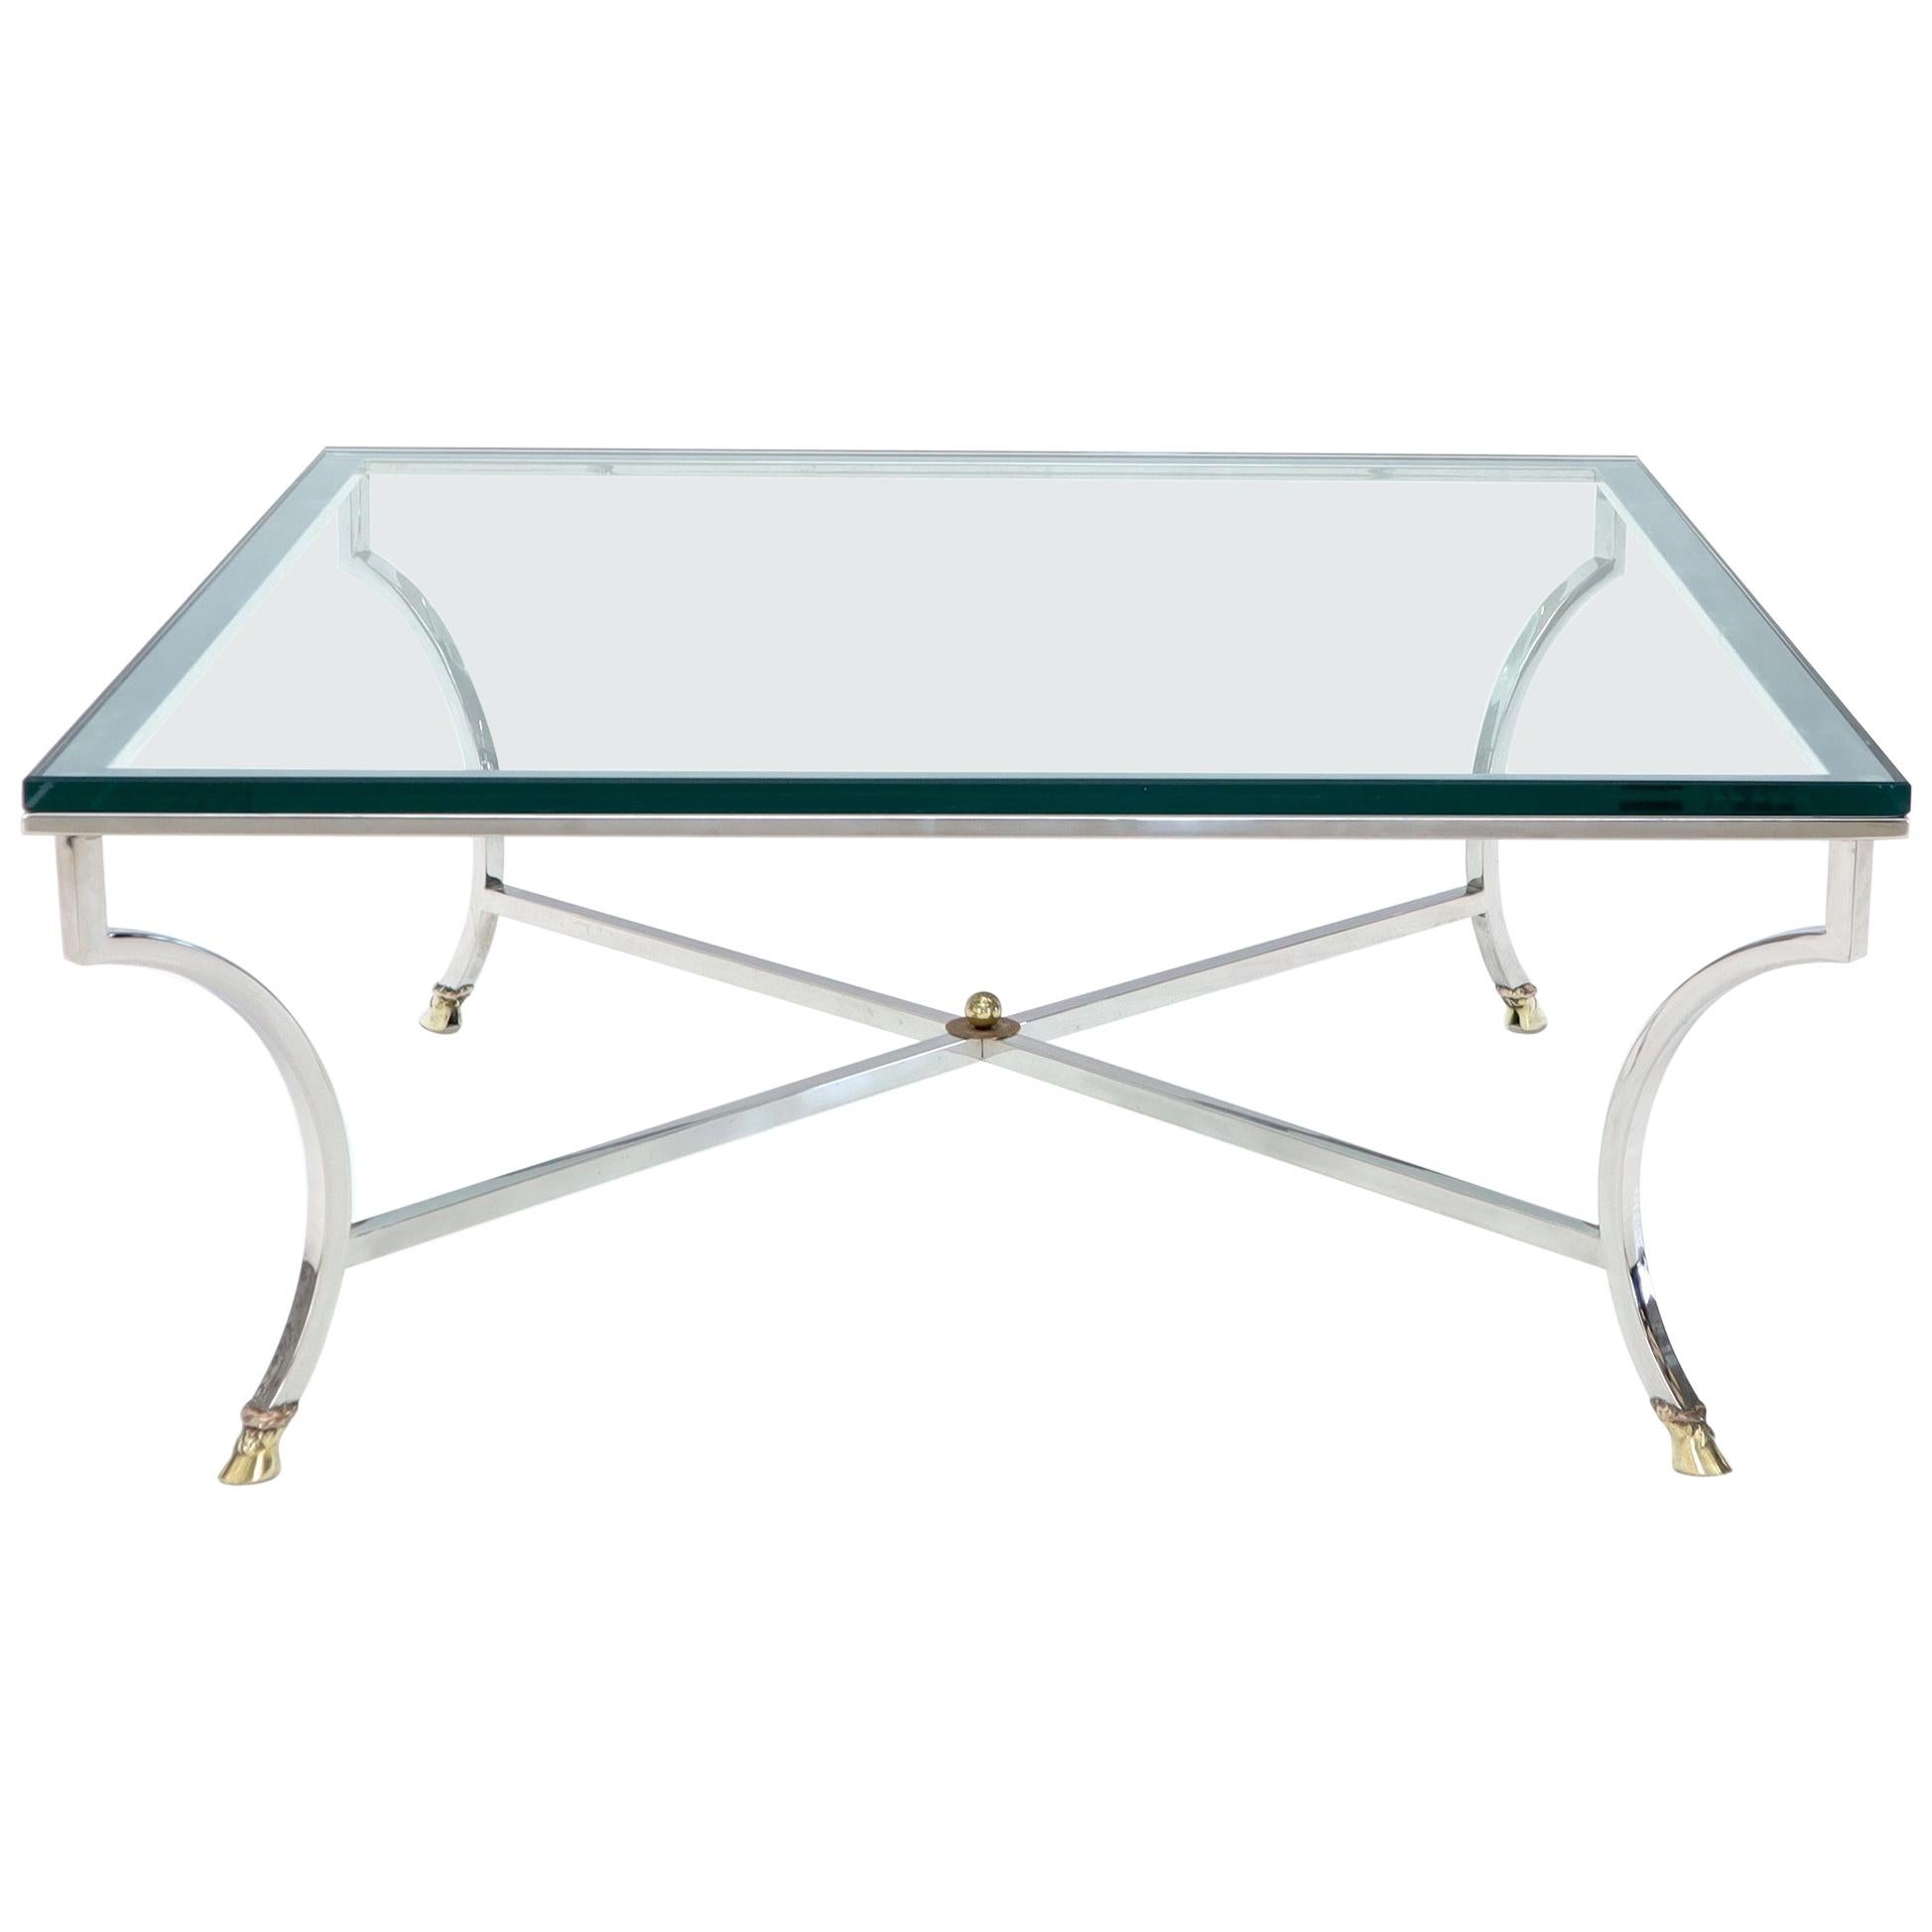 Square Chrome and Brass Hoof Feet Base Coffee Table Thick Glass Top For Sale